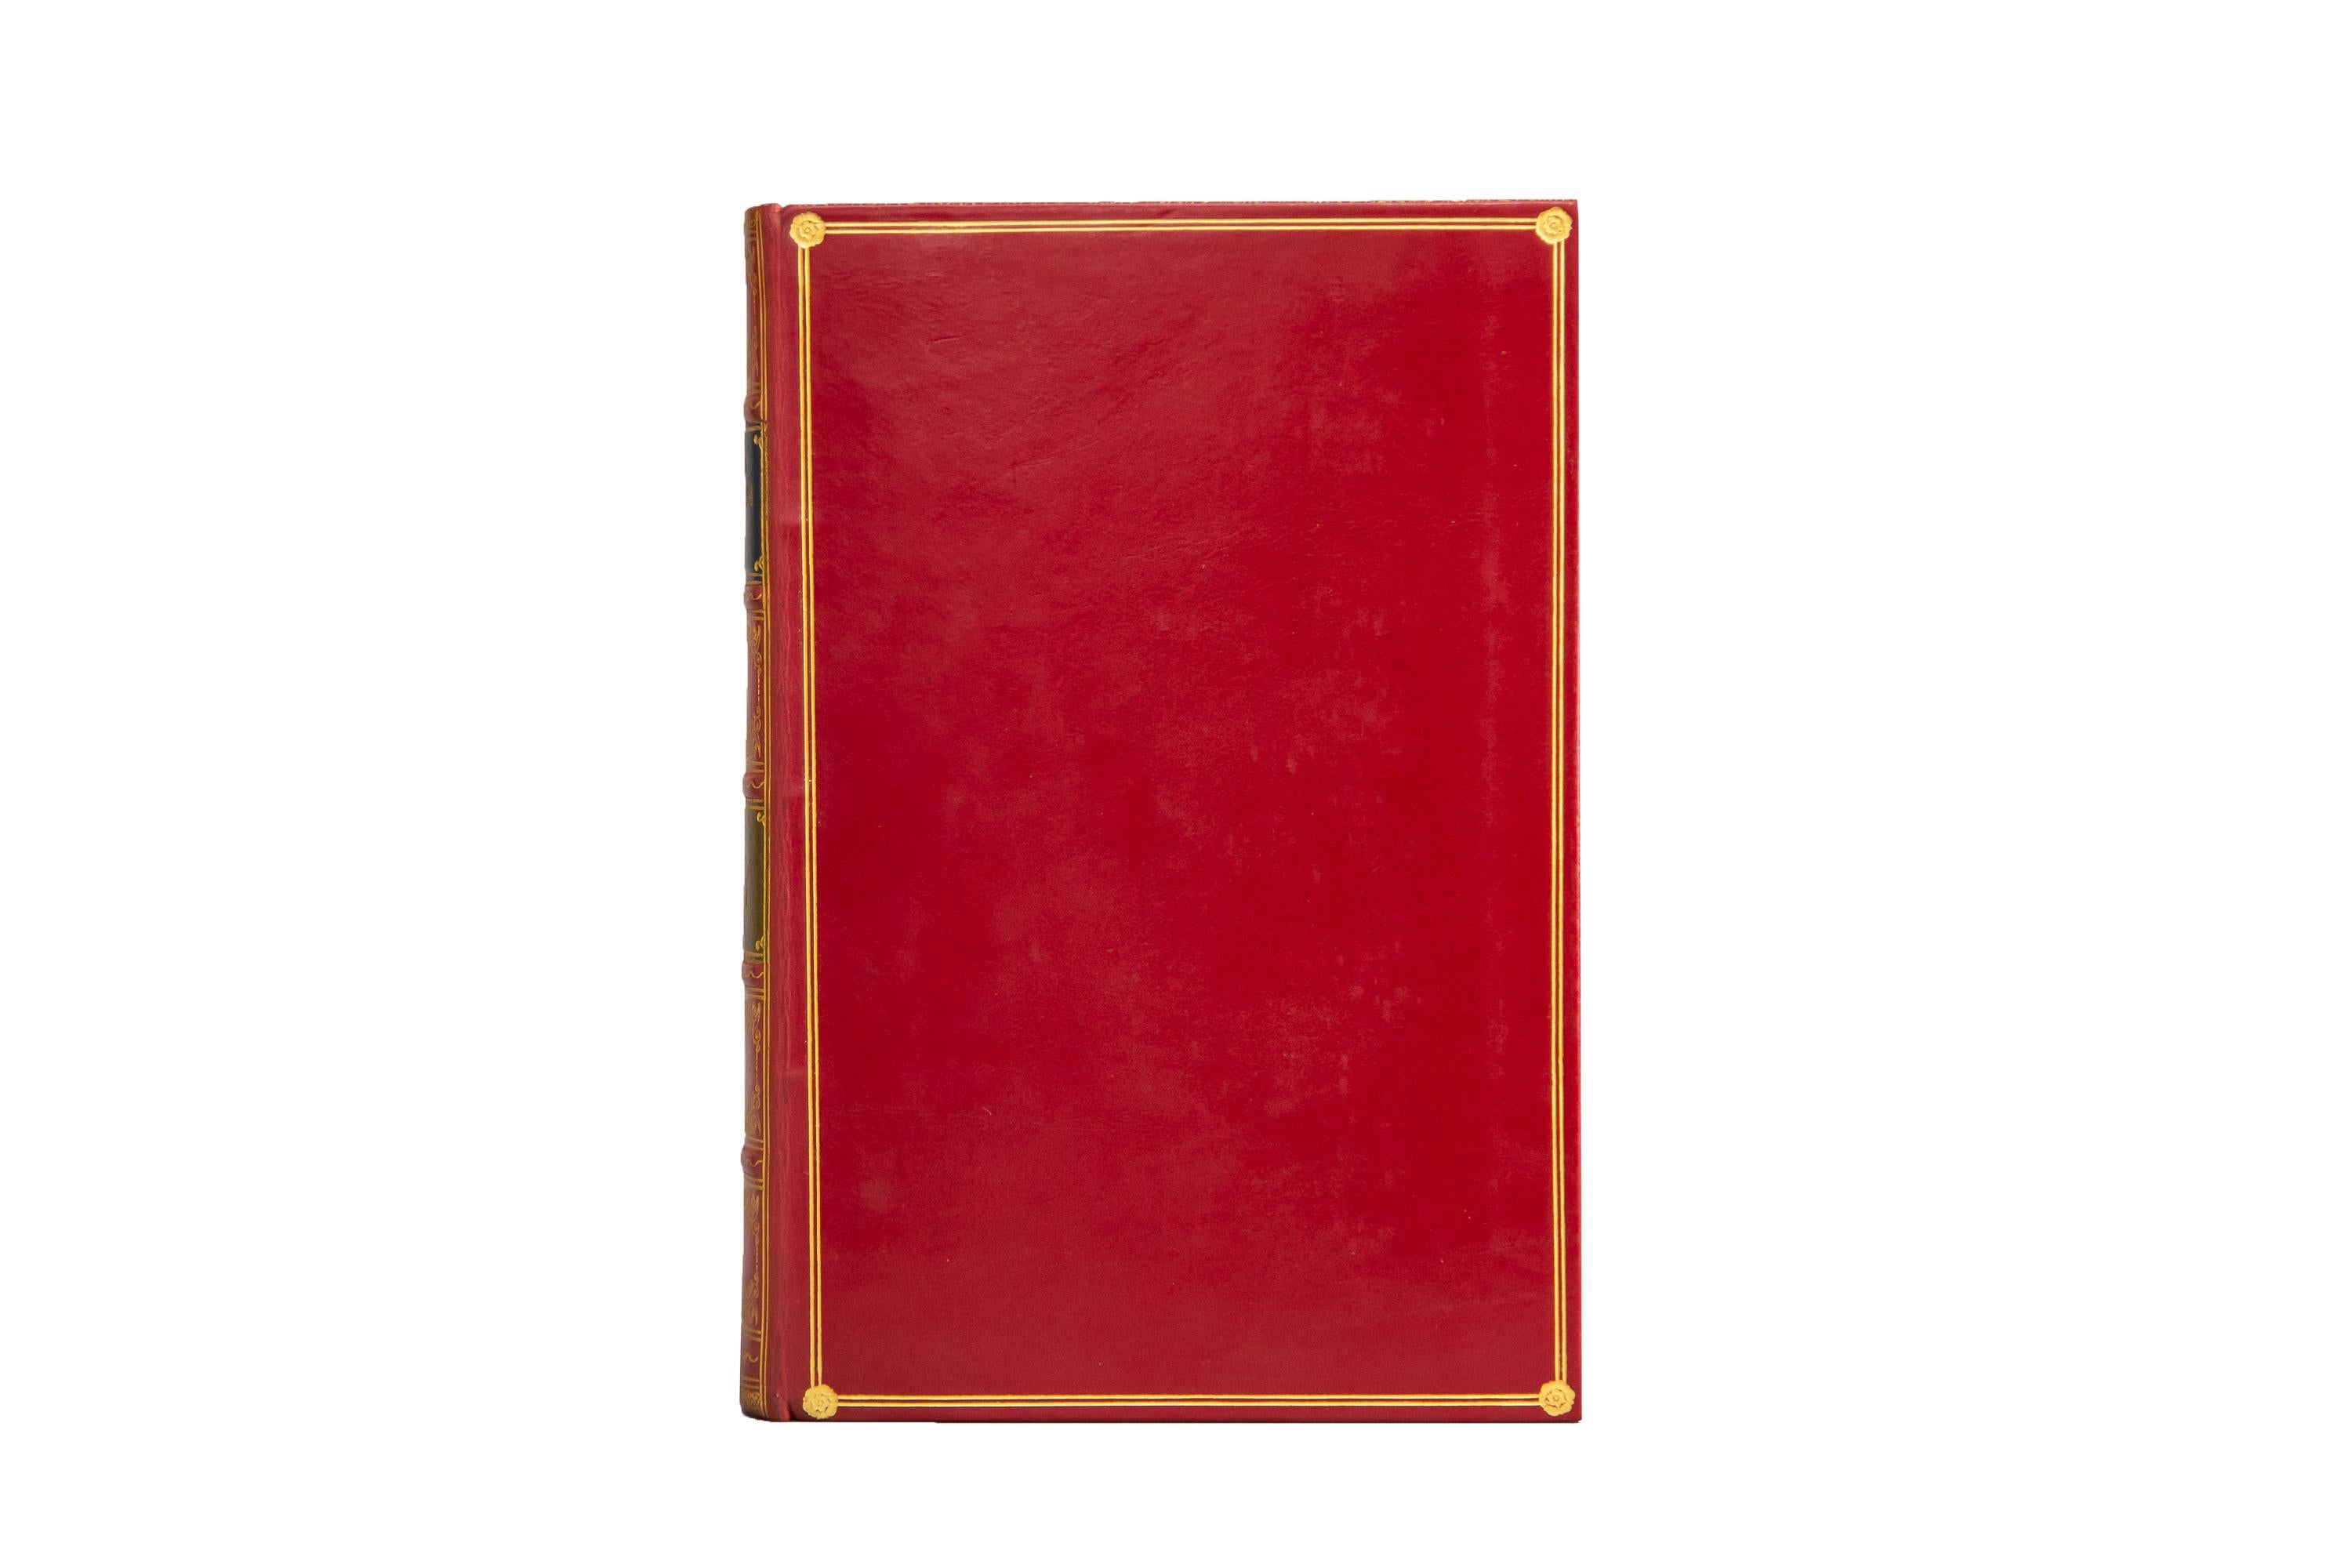 2 Volumes. Harvey Cushing, The Life of Sir William Osler. First edition. Bound in full red calf by Bayntun. The covers display gilt bordering with a small floral detail in each corner. Raised spine gilt with the title panels displaying blue and